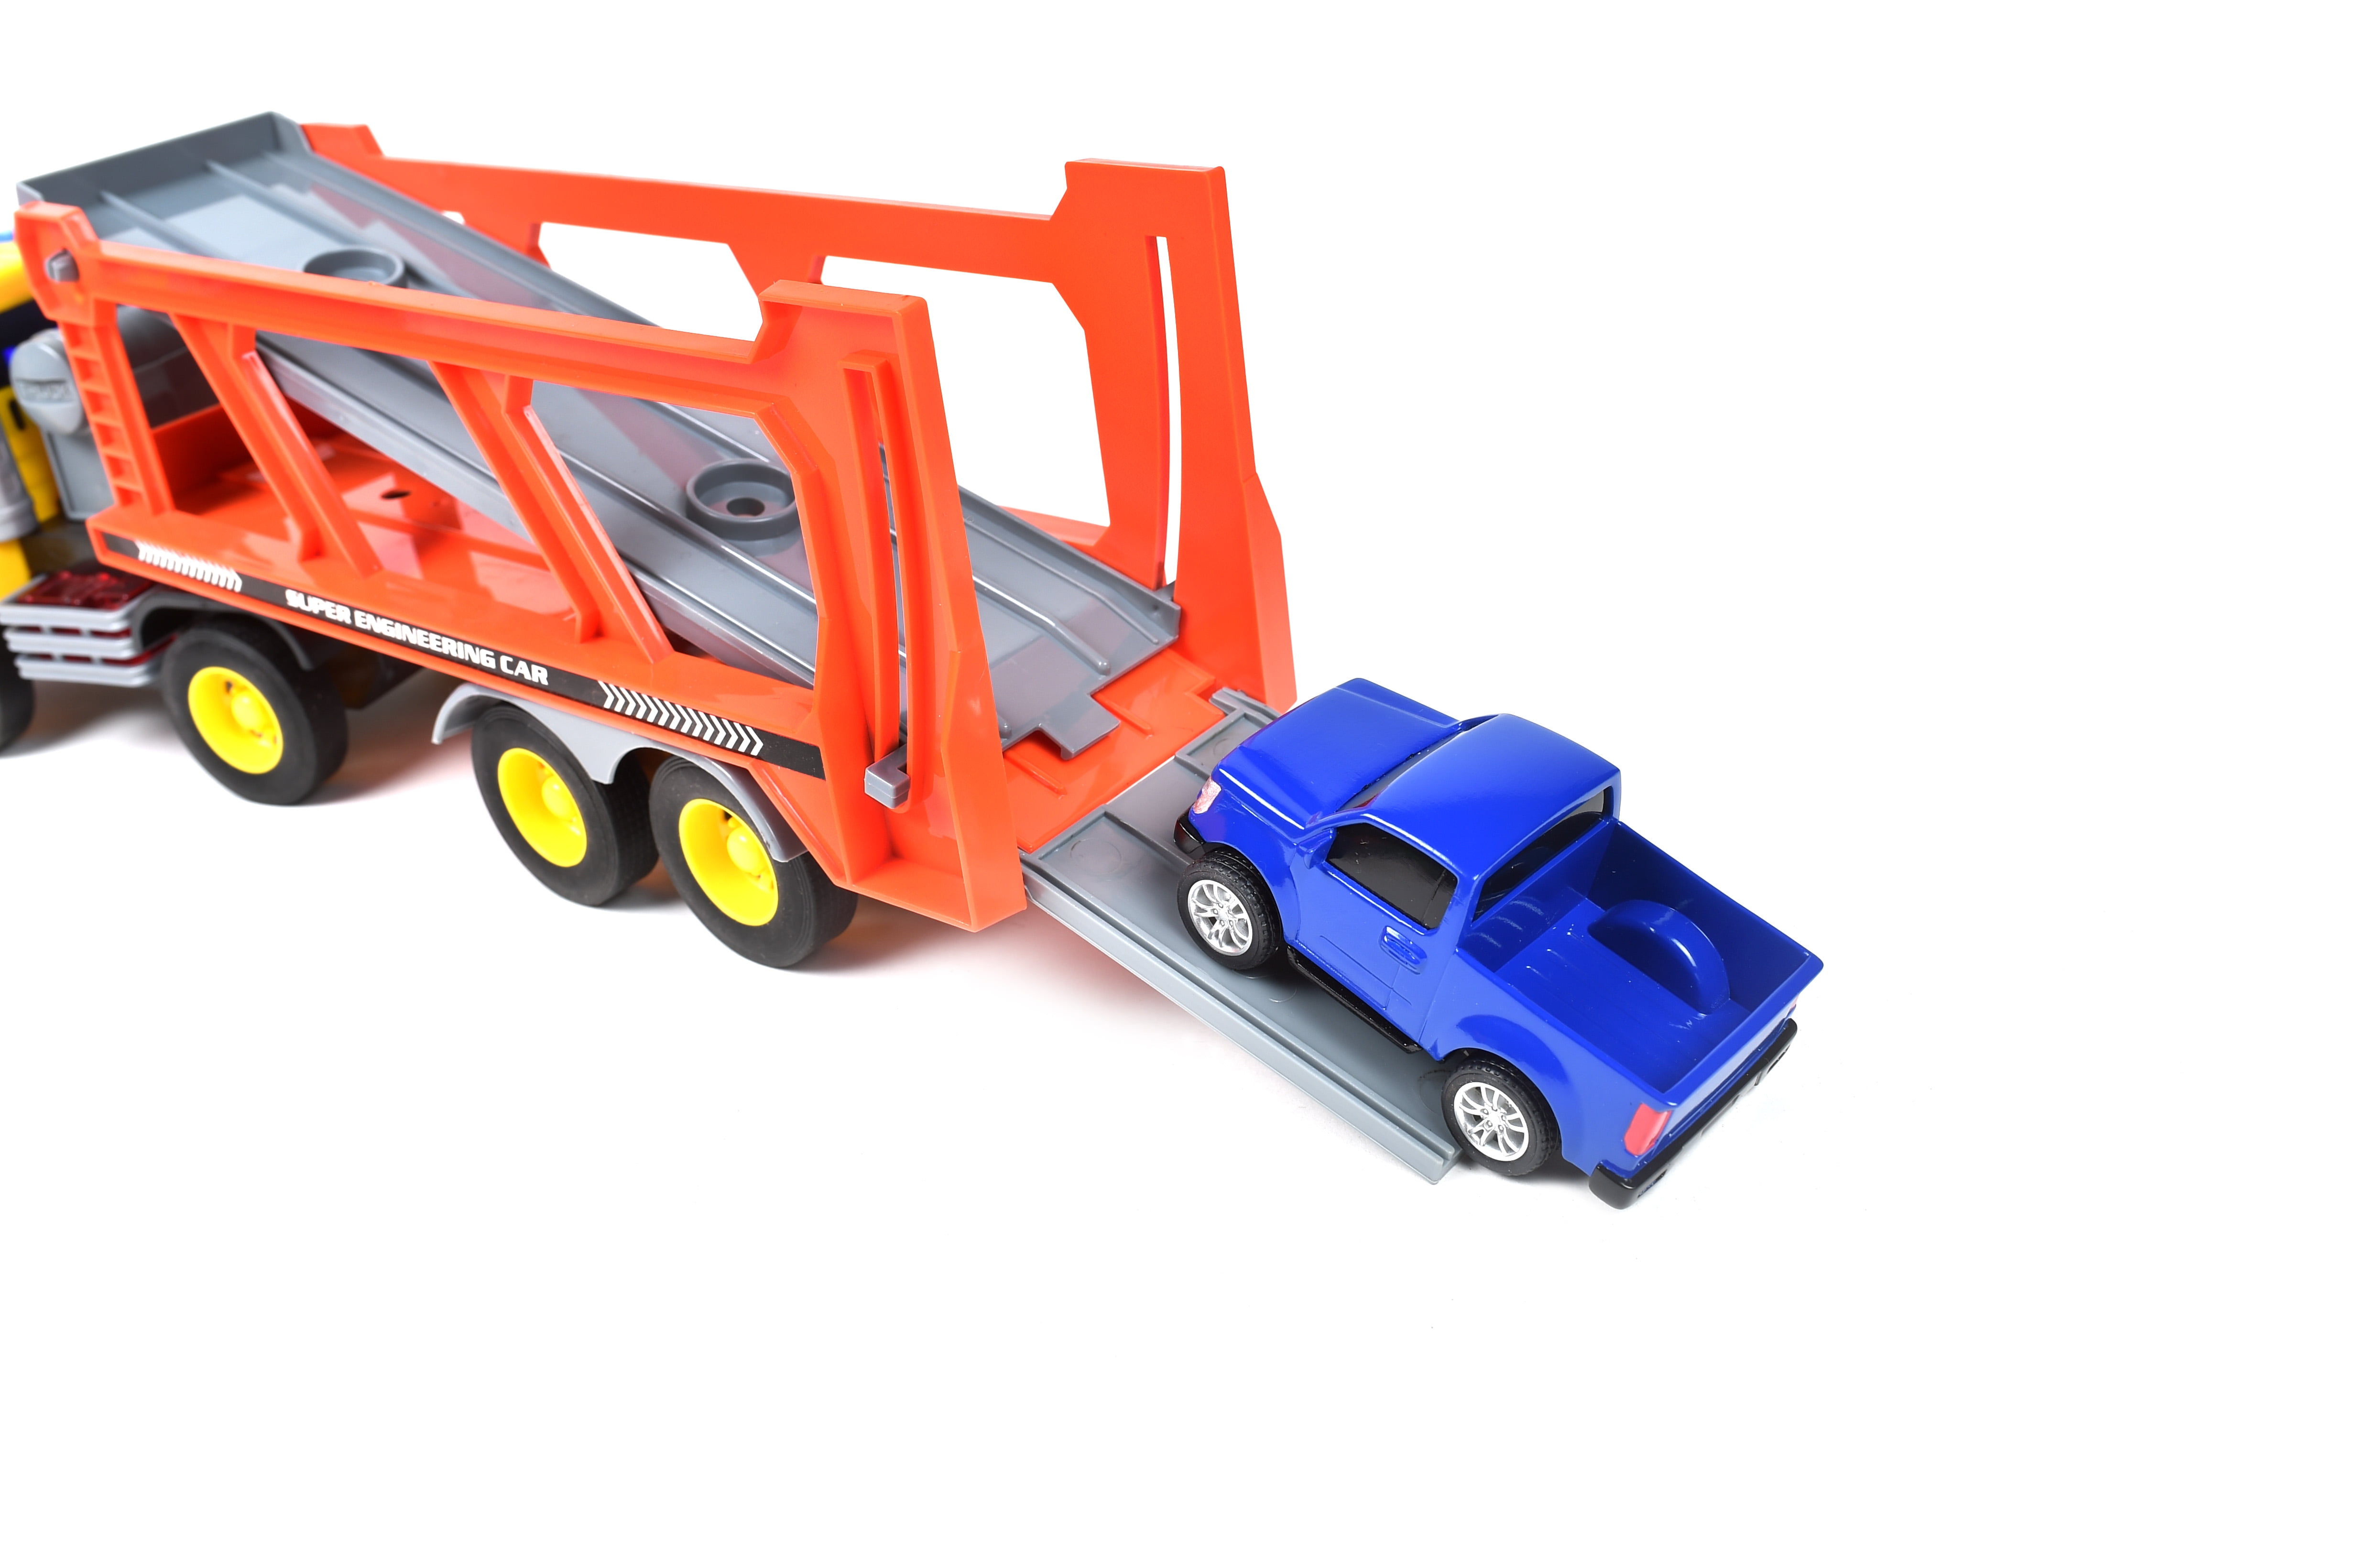 Maxx Action 1:16 Scale Long Hauler Play Vehicle Transport Truck